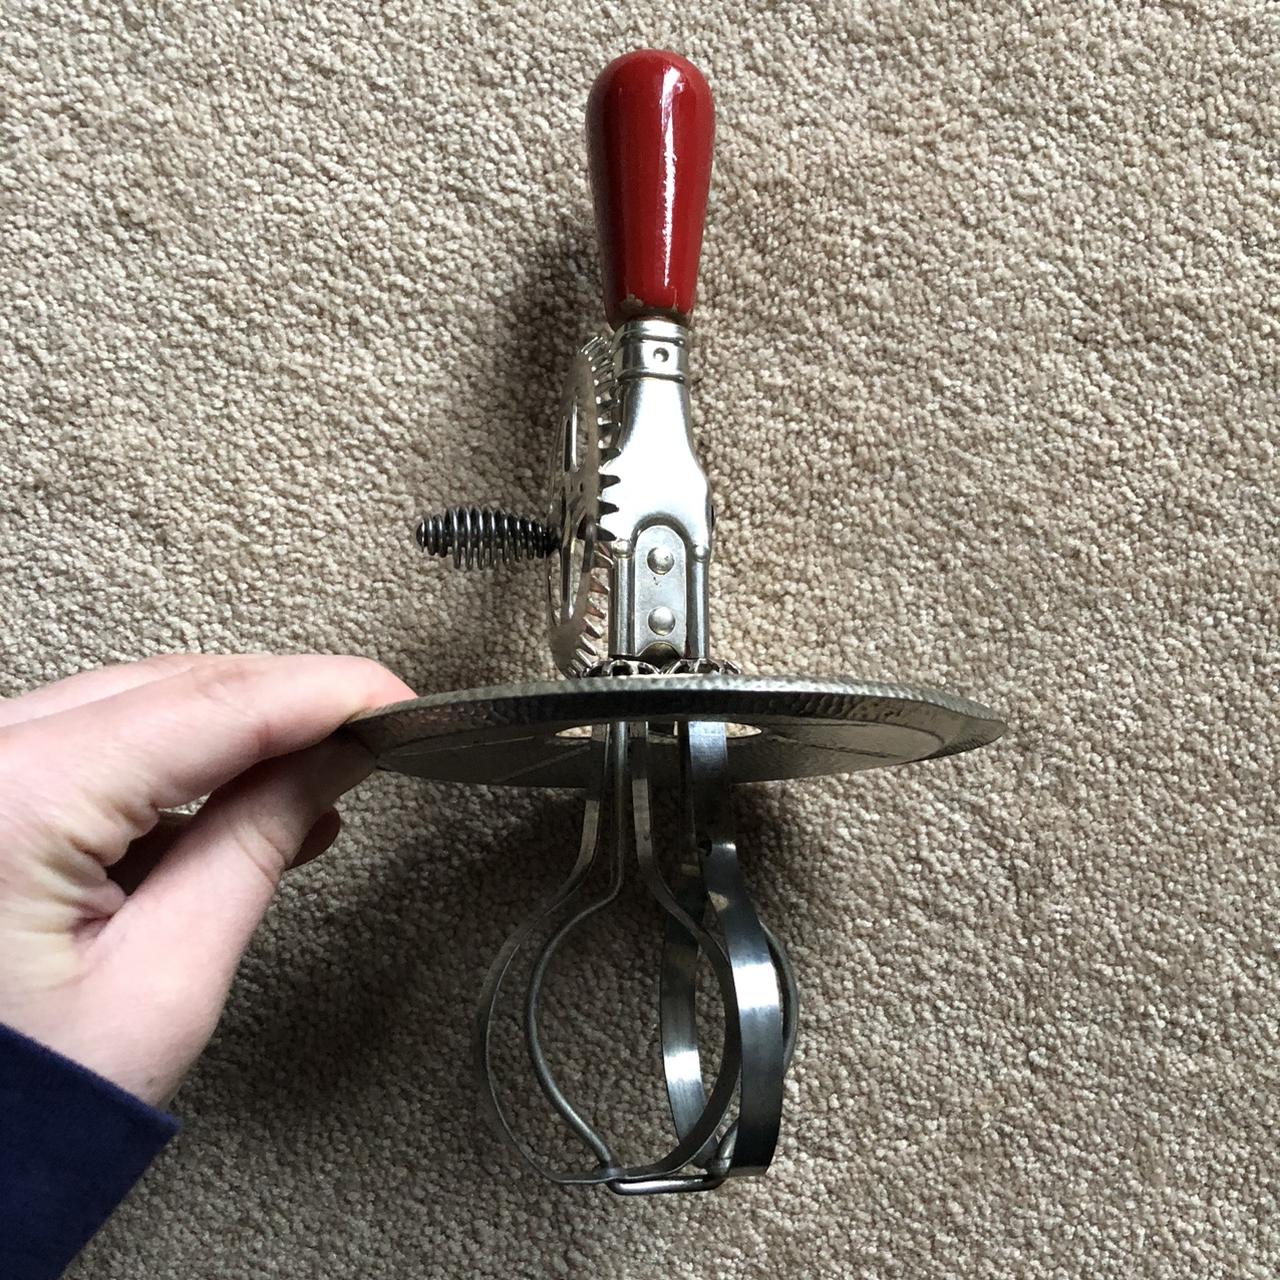 Vintage Hand Mixer / Egg Beater Manual with Wood Handle